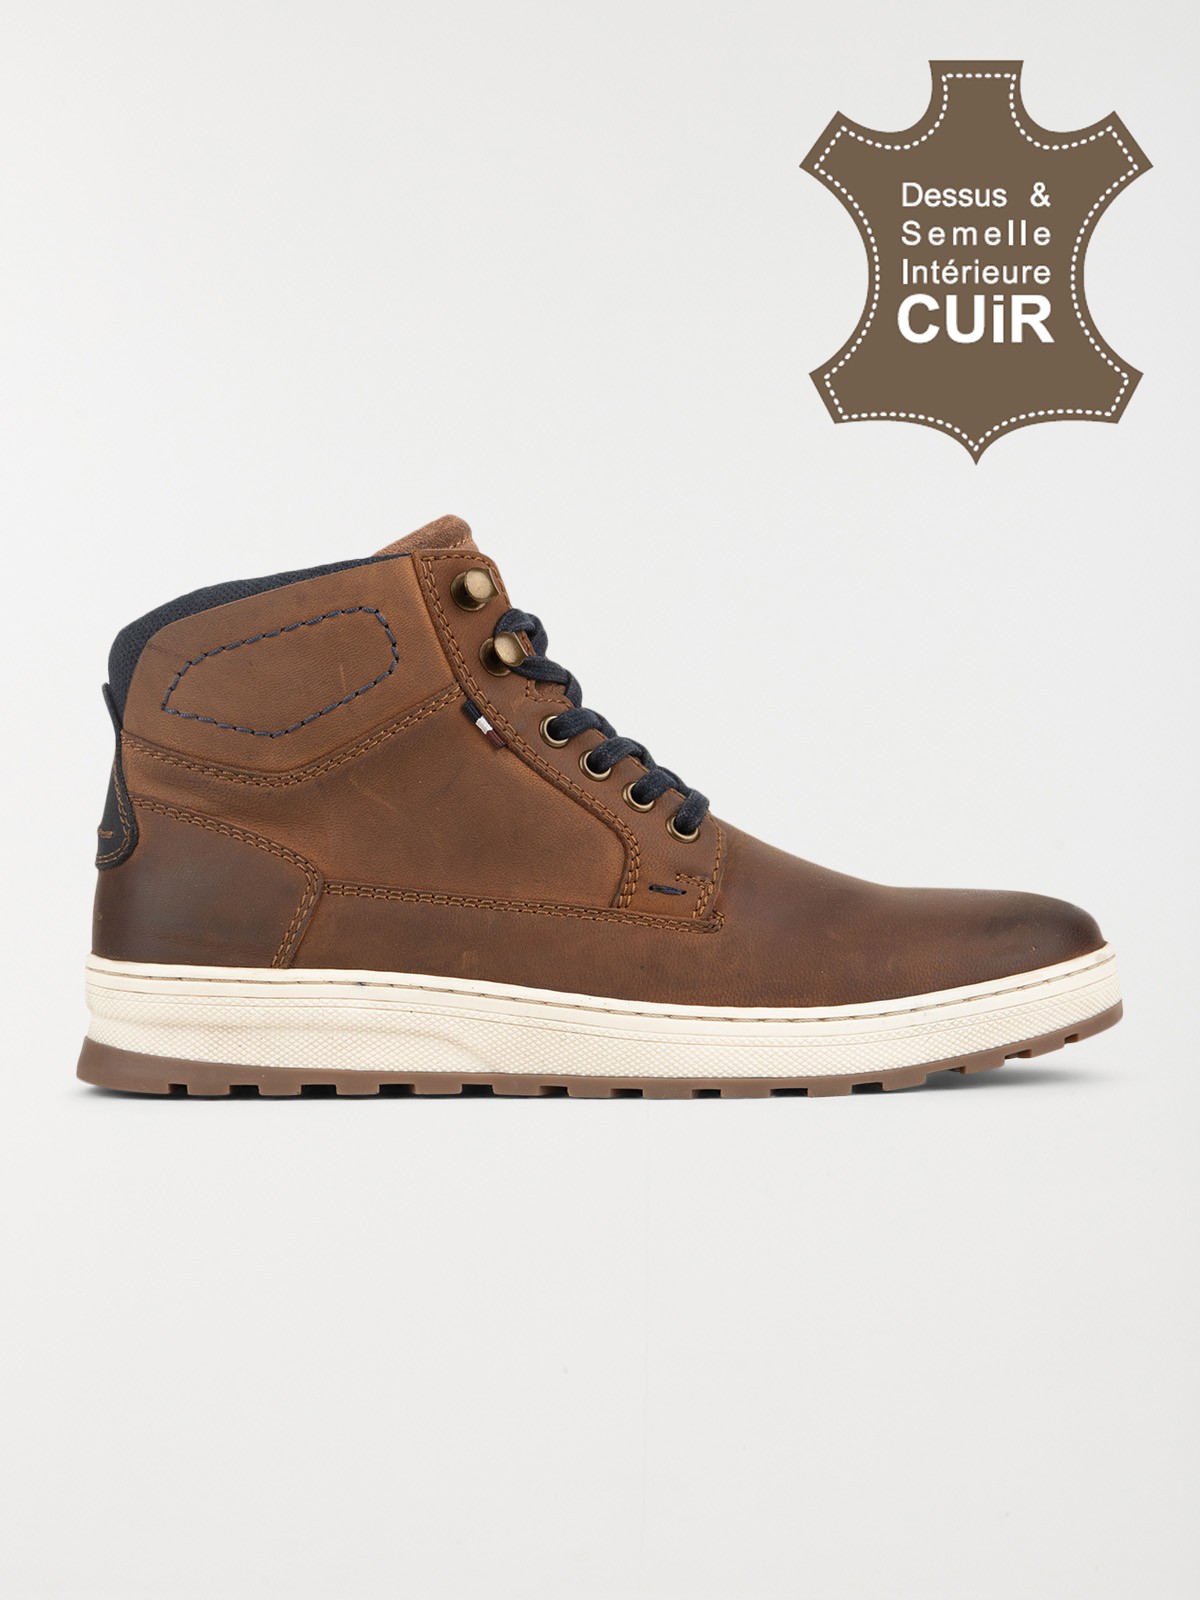 Chaussures montantes homme tan (40-45) - DistriCenter